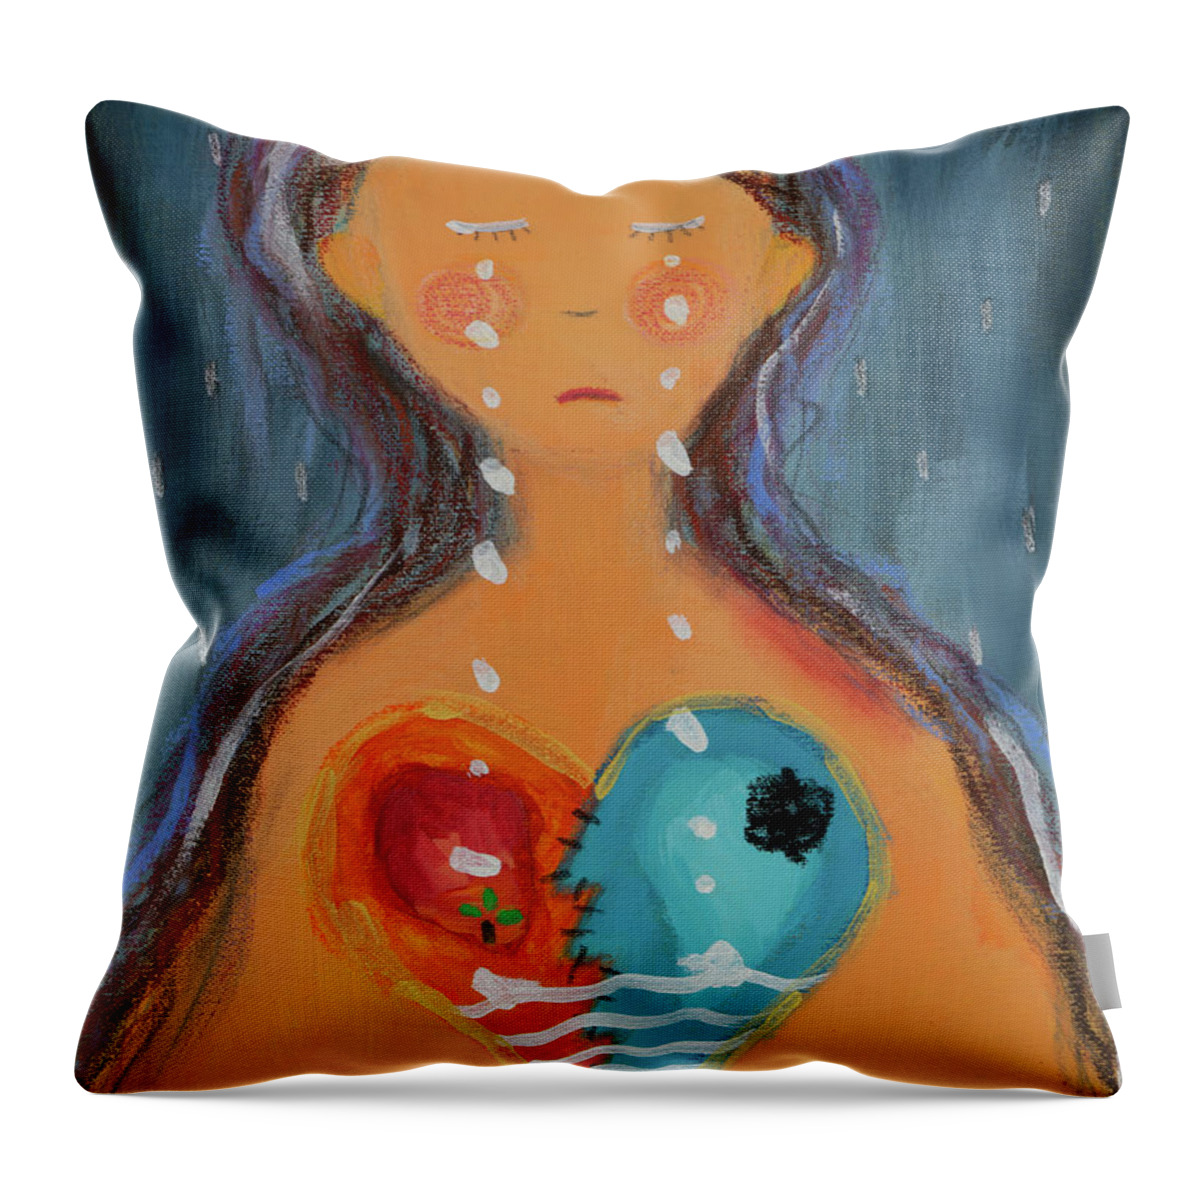 Female Throw Pillow featuring the painting Sorrow by Janet Yu